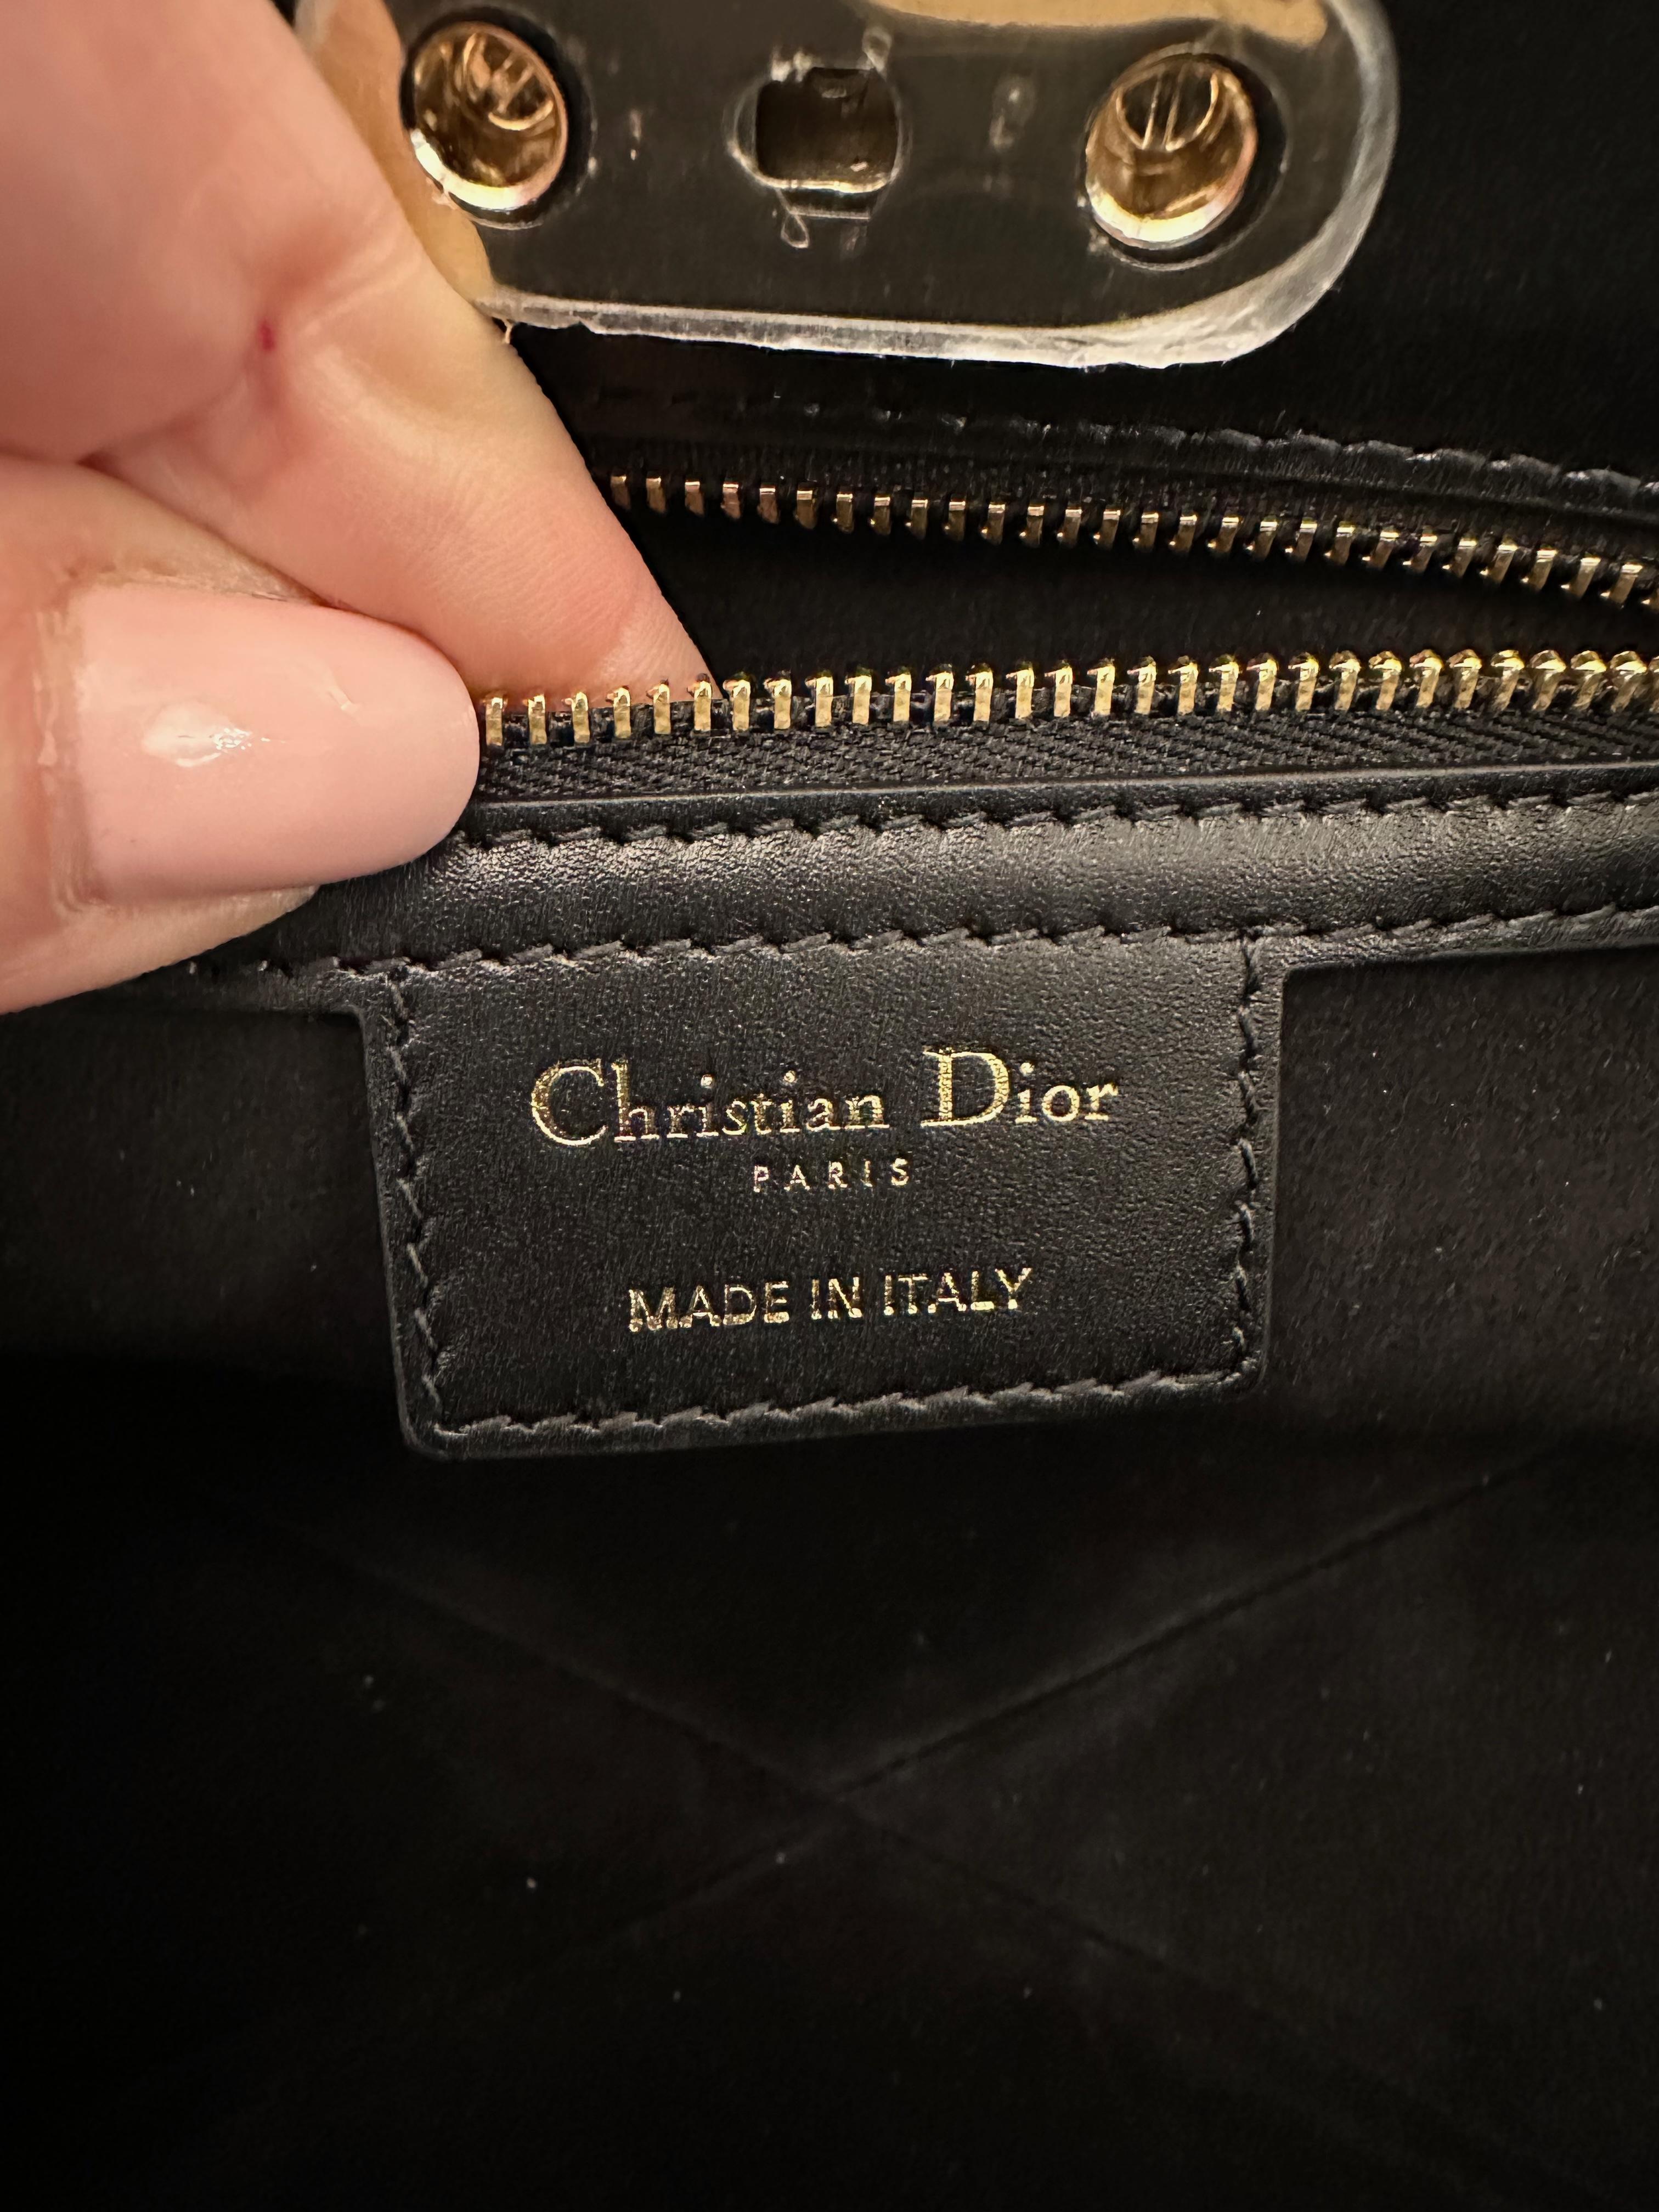 Inspired from the archives of the Christian Dior house, this Dior Key bag is crafted in a beautiful black box calfskin leather.
It feaures 2x handles allowing a hand or shoulder carry. The closure is to remind a key lock.
The inside is lined with a